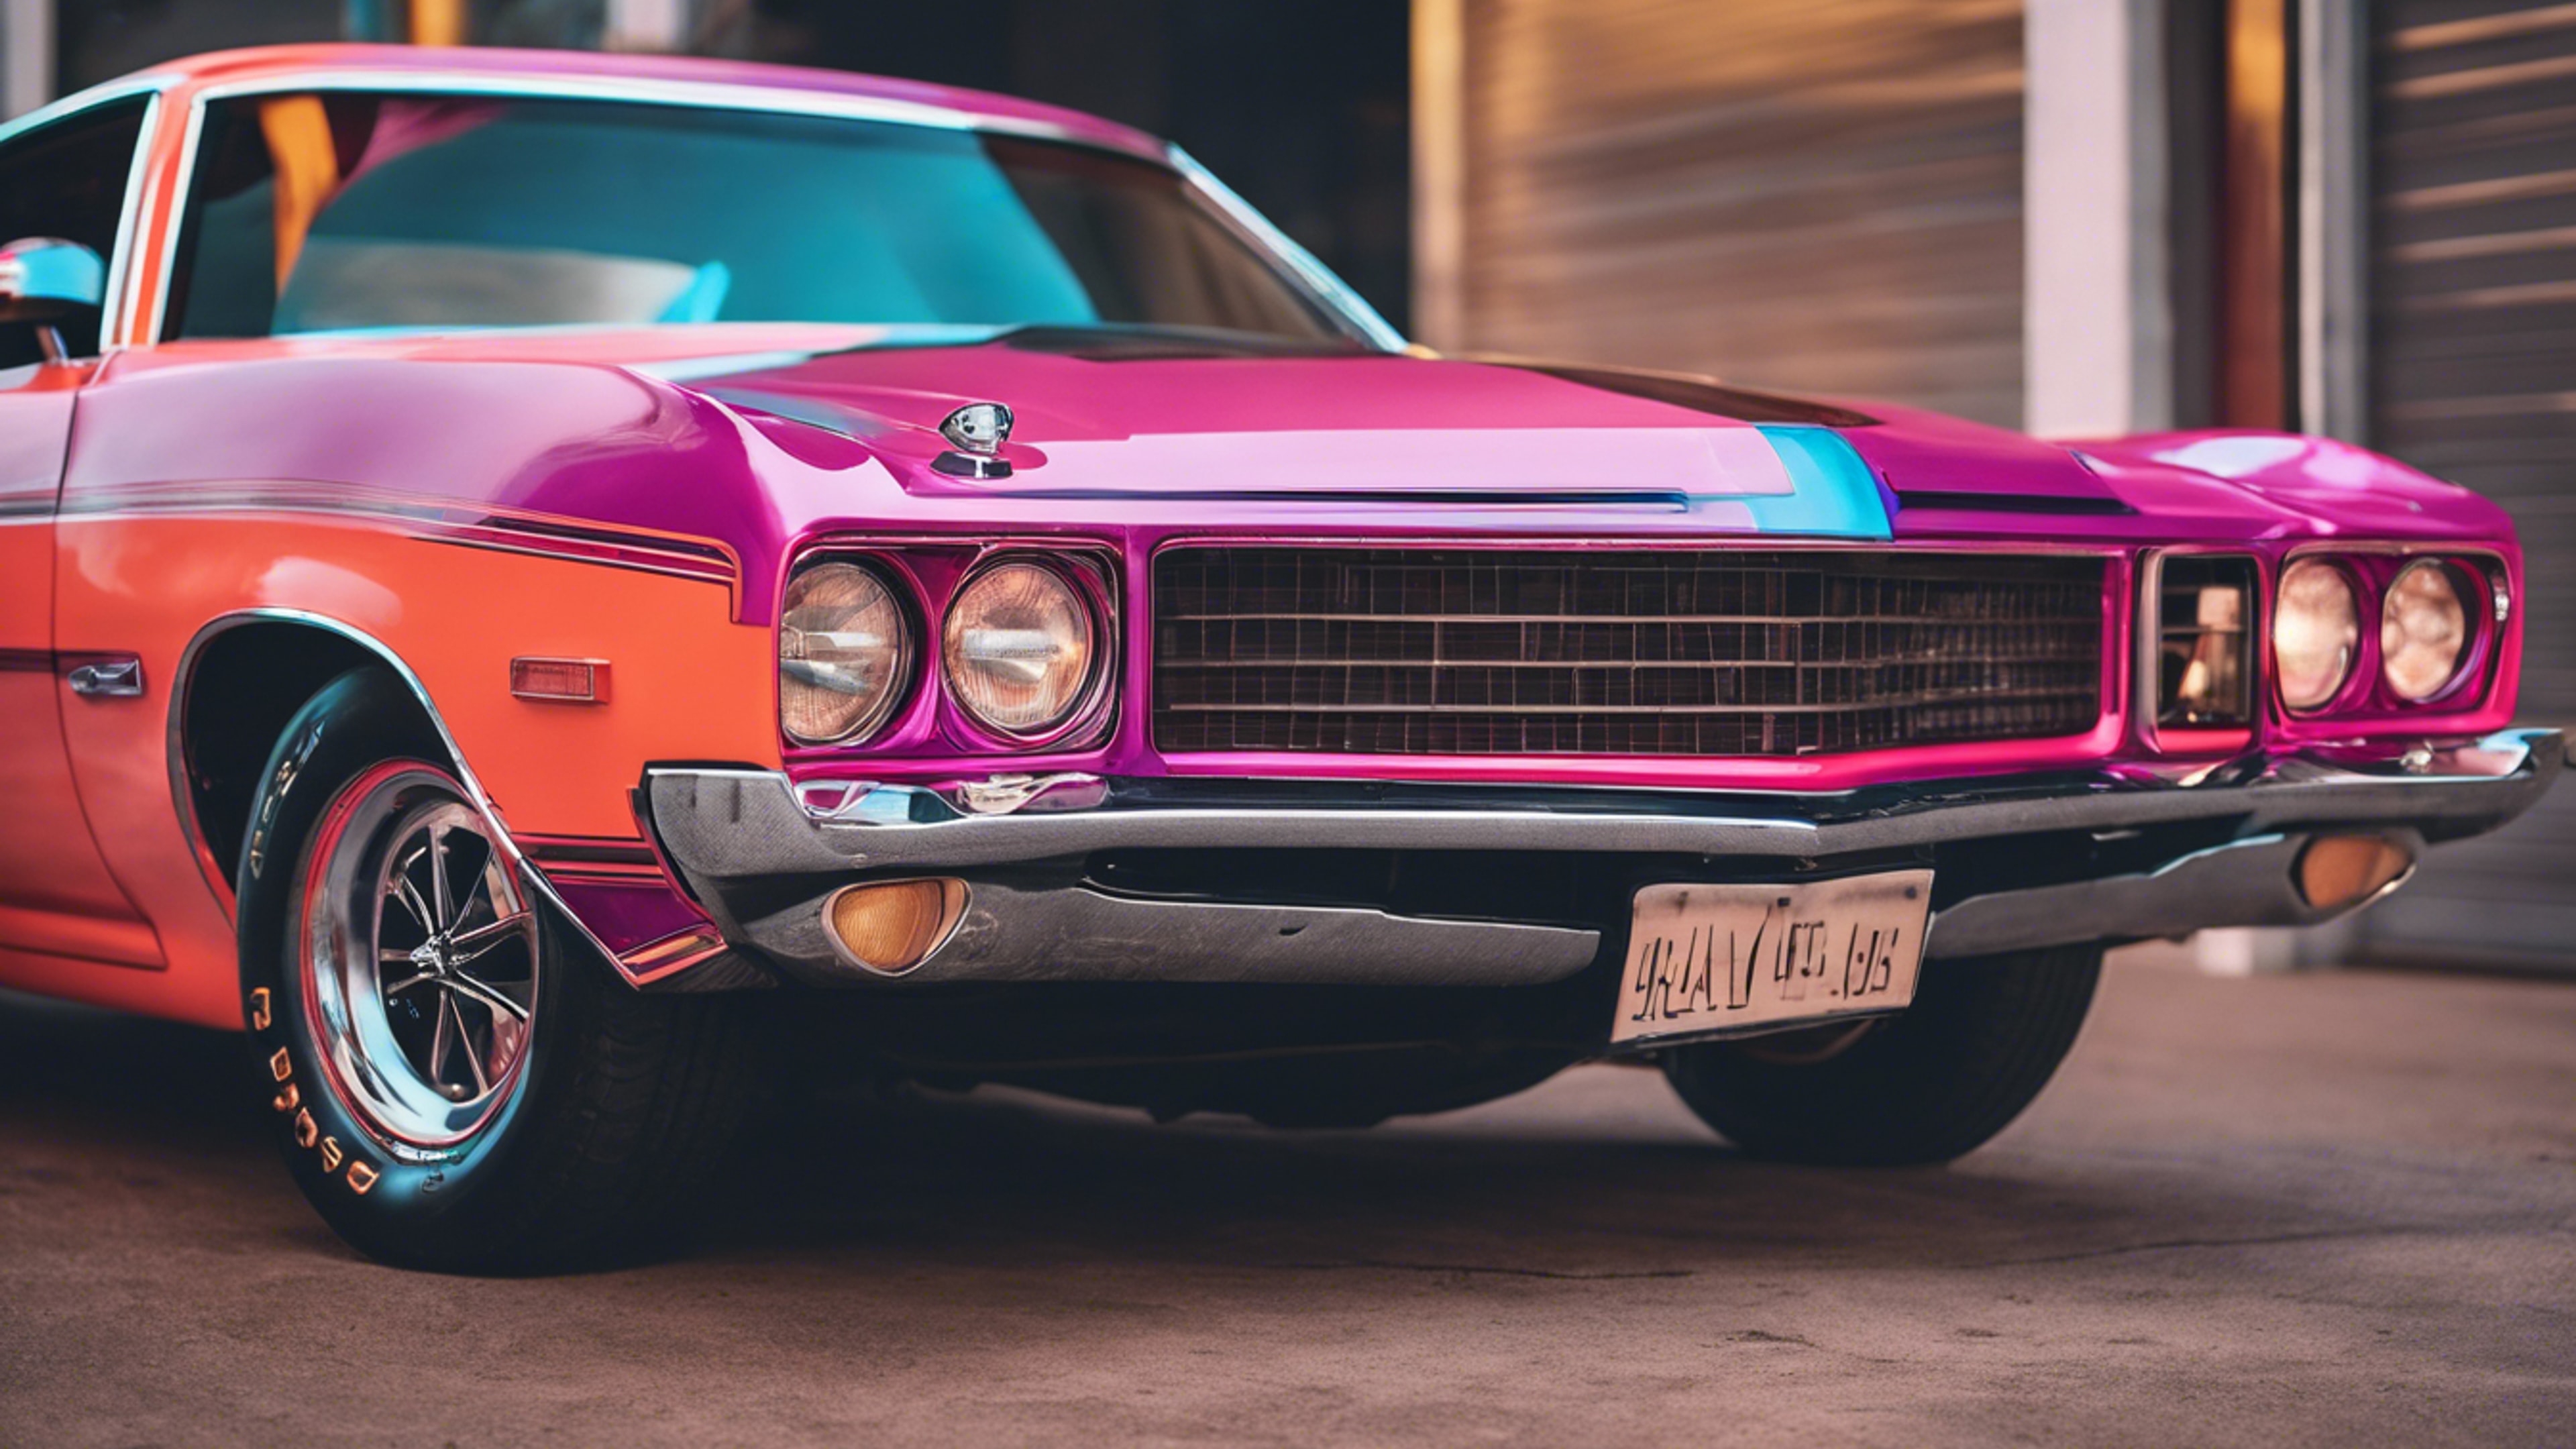 A classic American muscle car from the 1970s, printed in bright neon colors Wallpaper[fa60d4cf89e348ffade4]